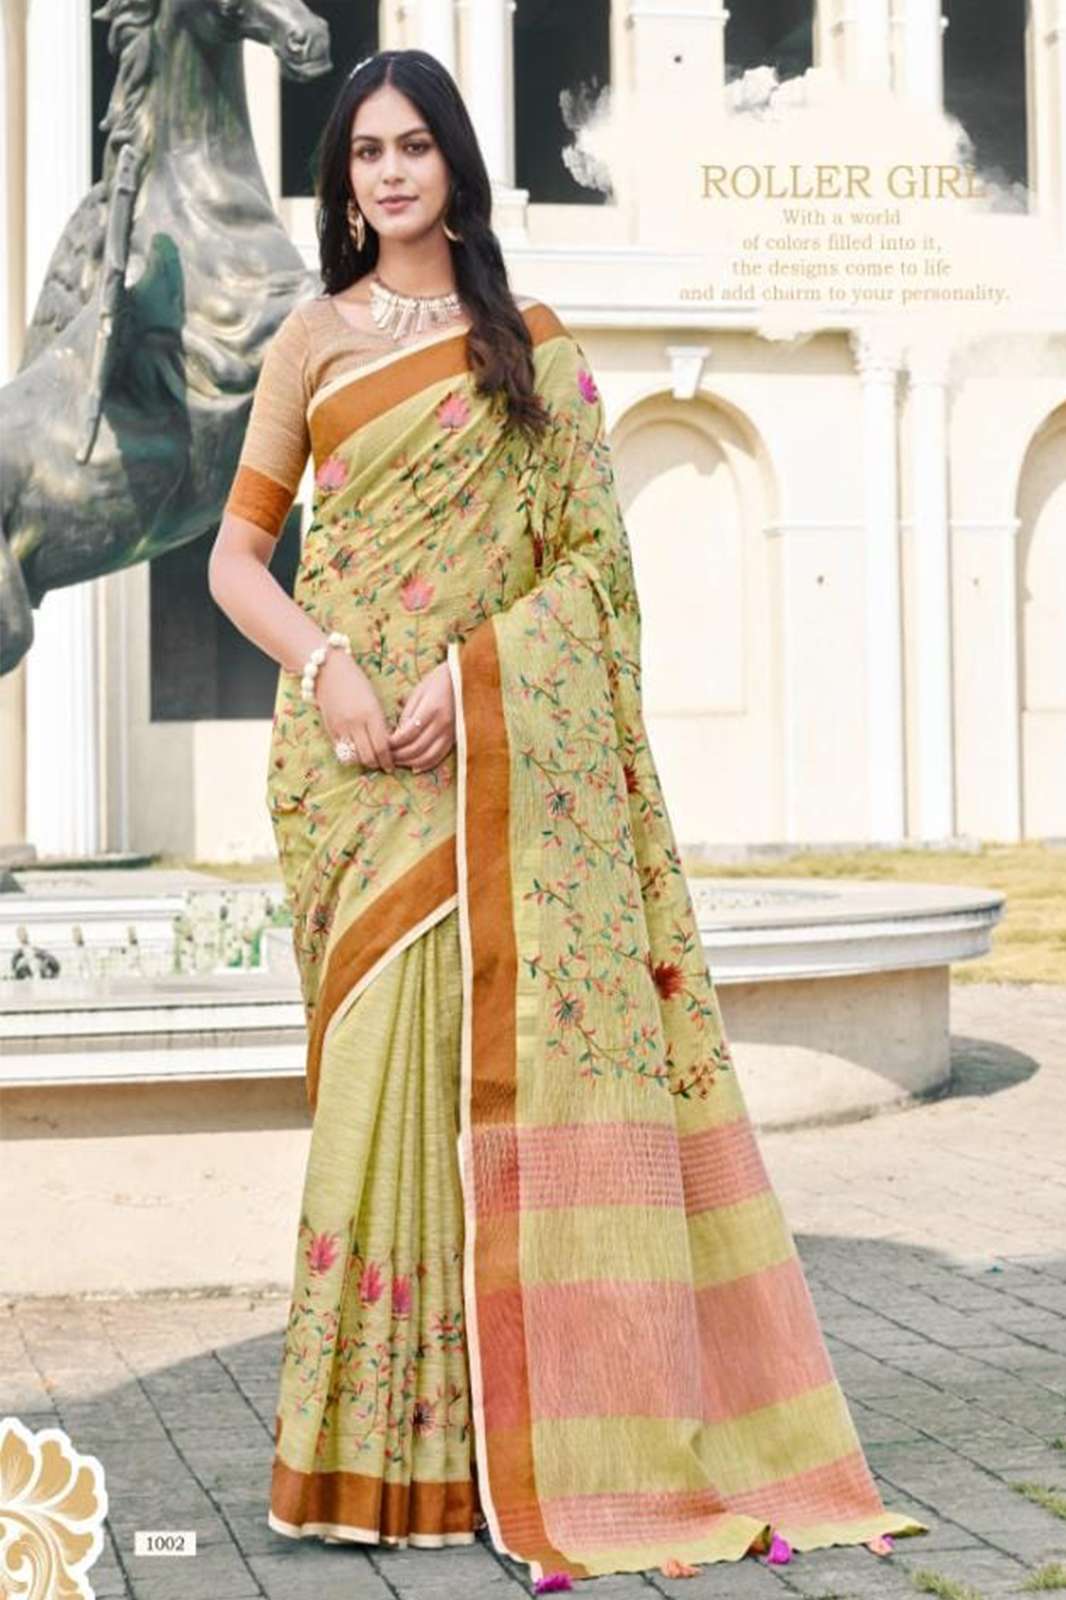 BUNAWAT LILAN STYLE  Linen saree  Embroidery Work and Tassels on Pallu saree in multicolors.